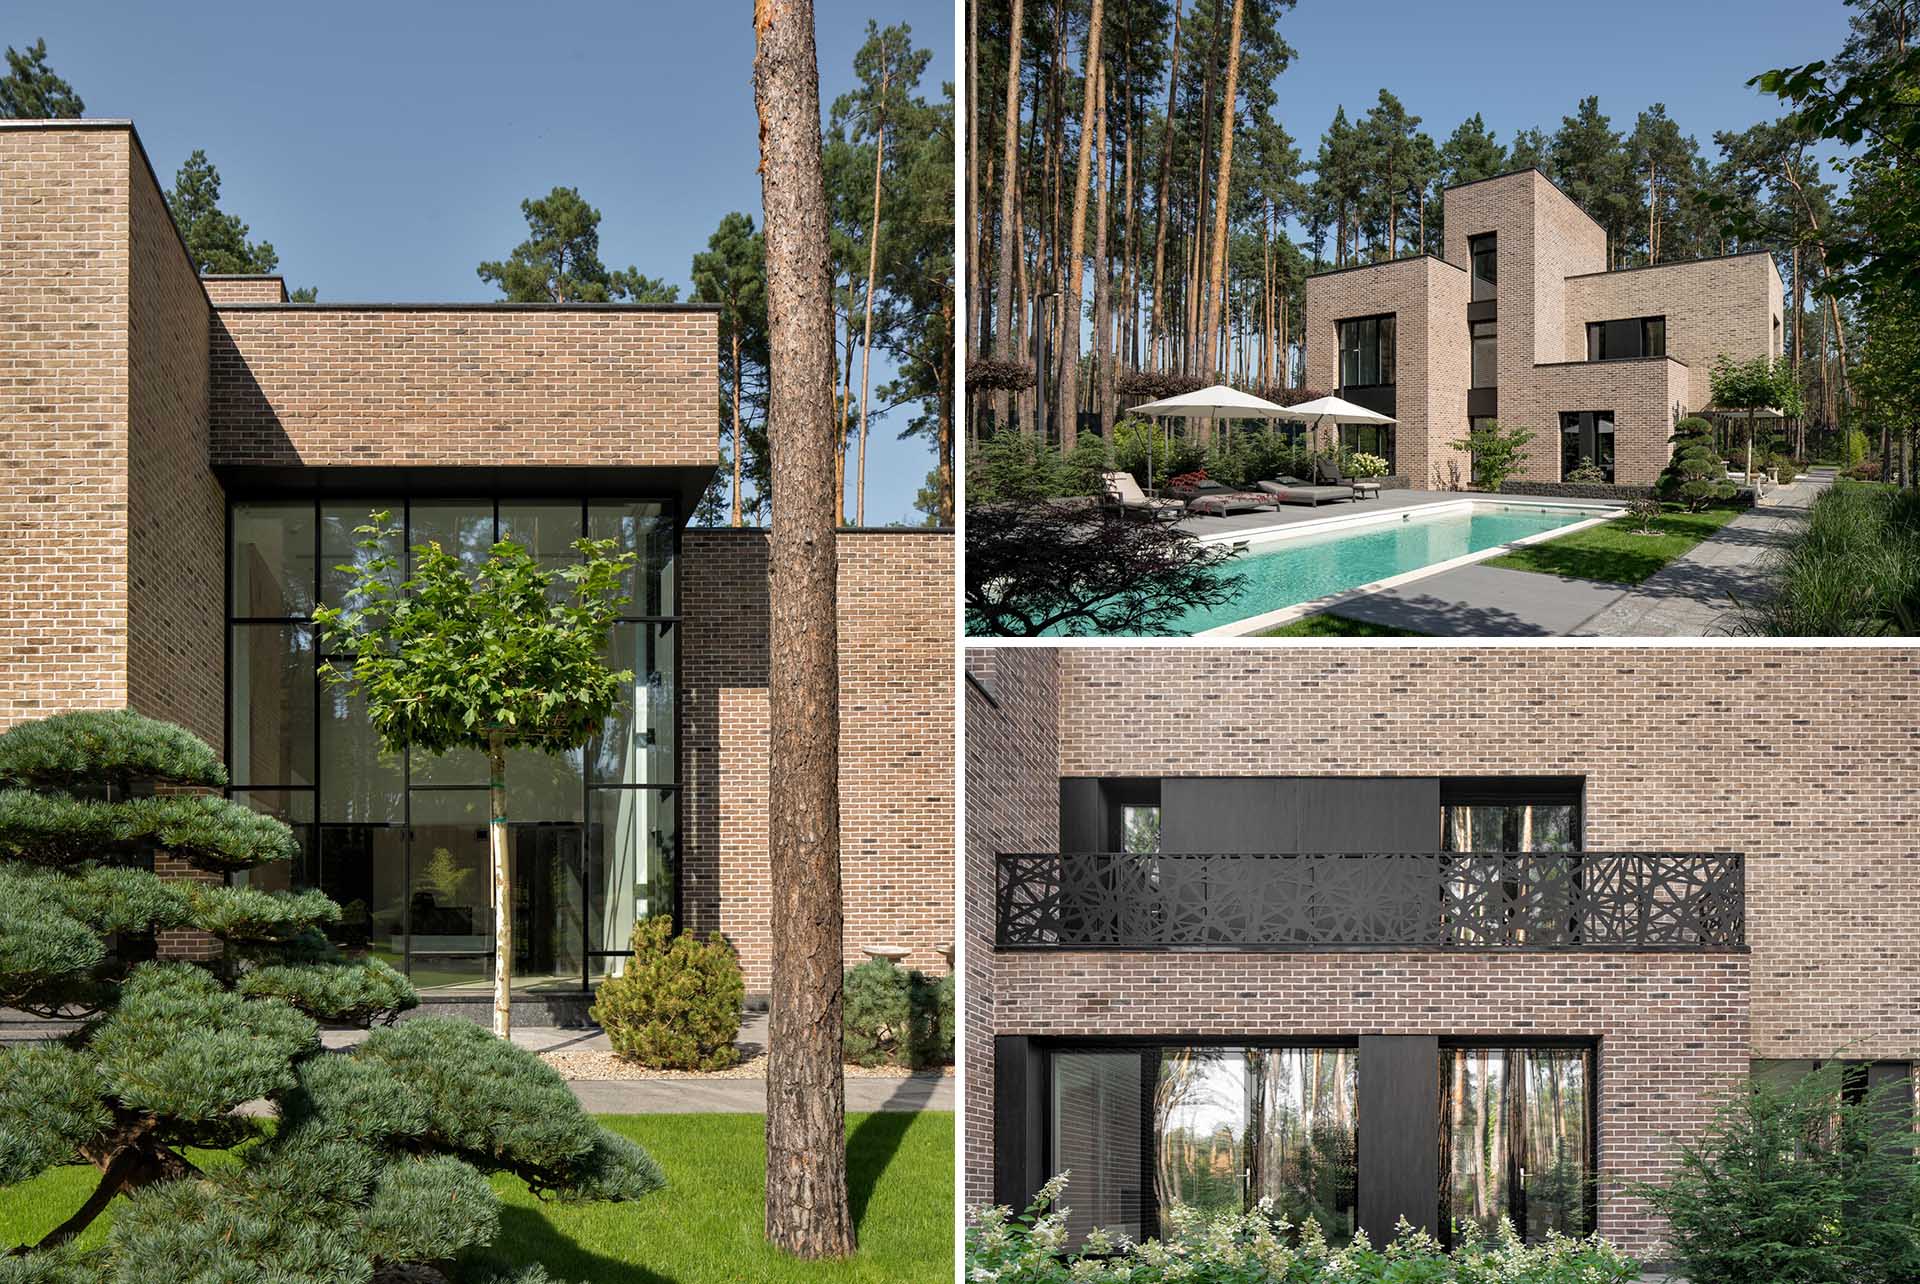 Surrounded by forest, the 'BST House', which also has a guest house, features a facade of hand-formed brick.